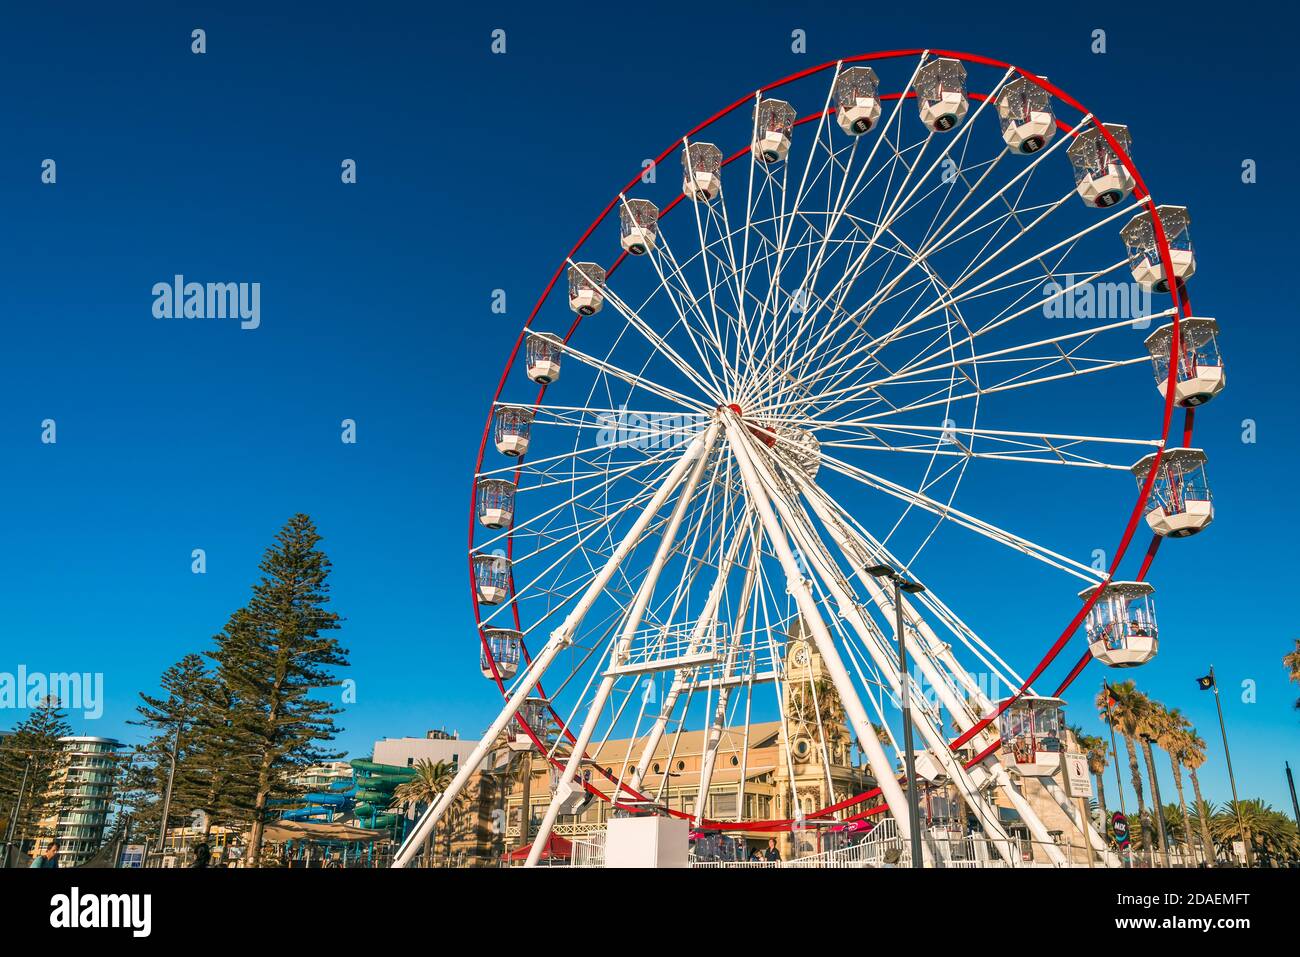 Adelaide, South Australia - January 12, 2019: Glenelg Mix102.3 Giant Ferris Wheel viewed from the Moseley Square on a bright summer day Stock Photo